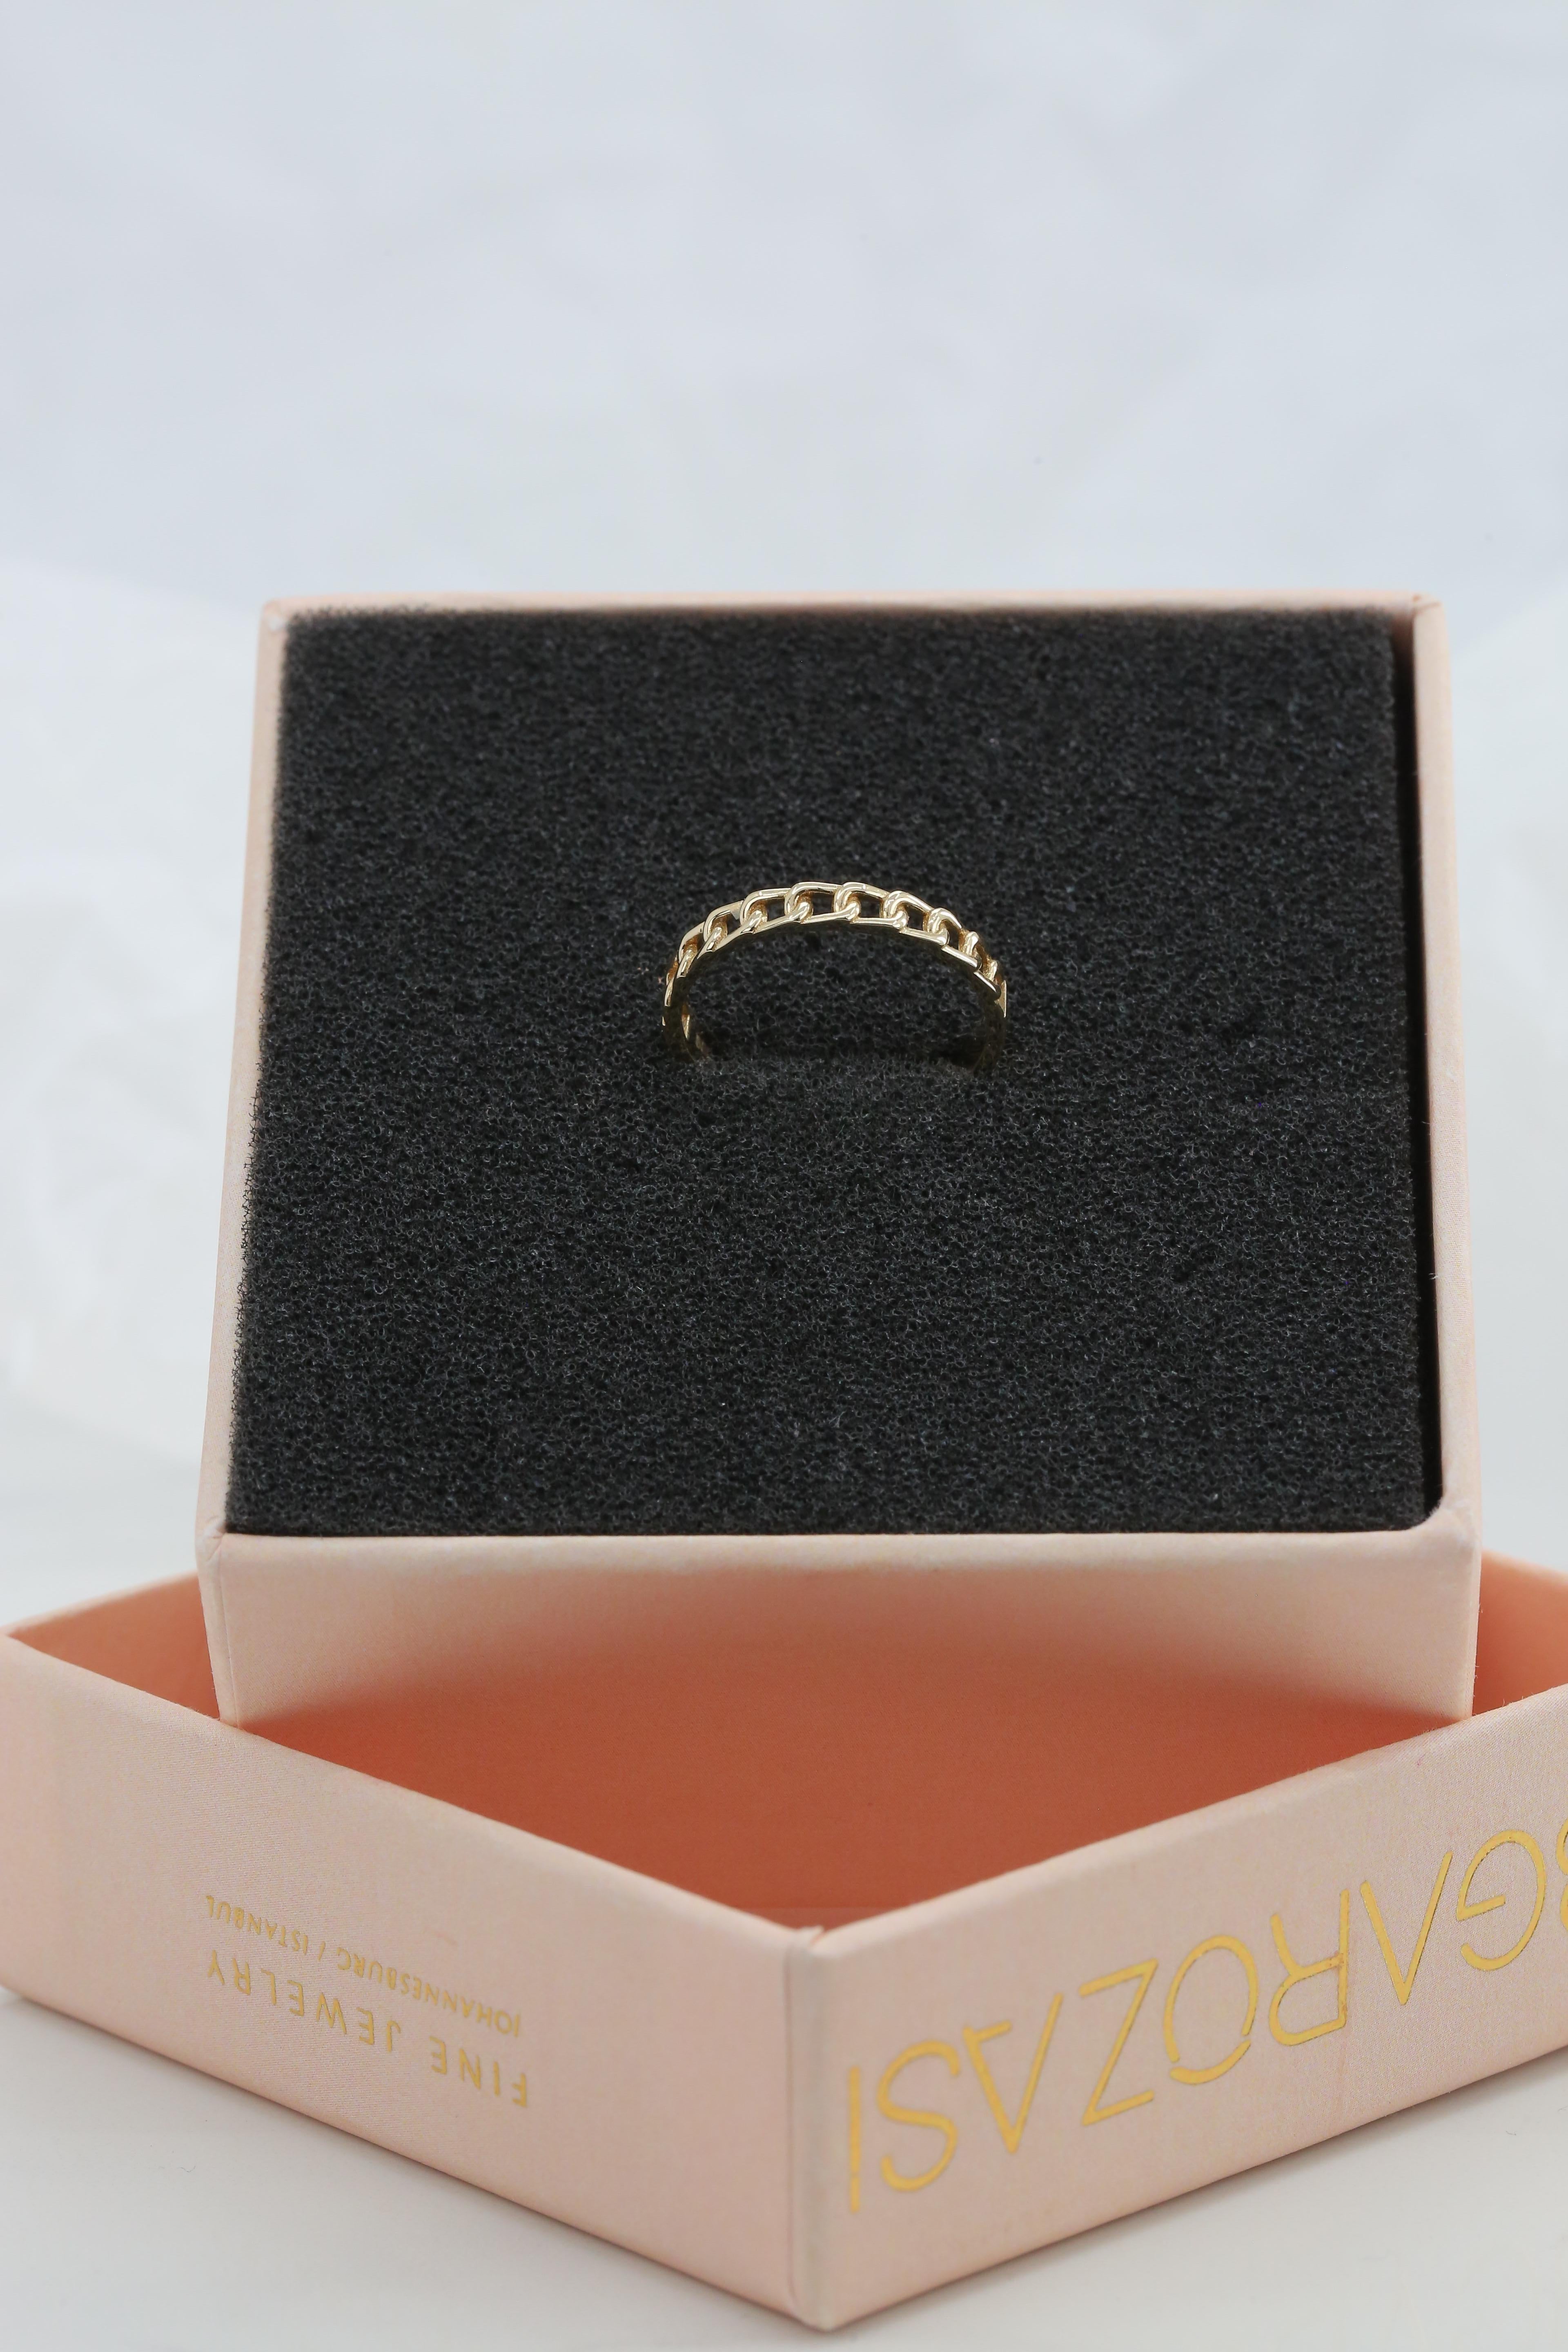 For Sale:  14k Gold Oval Chain Ring, Gold Link Ring, Designer Chain Ring 3